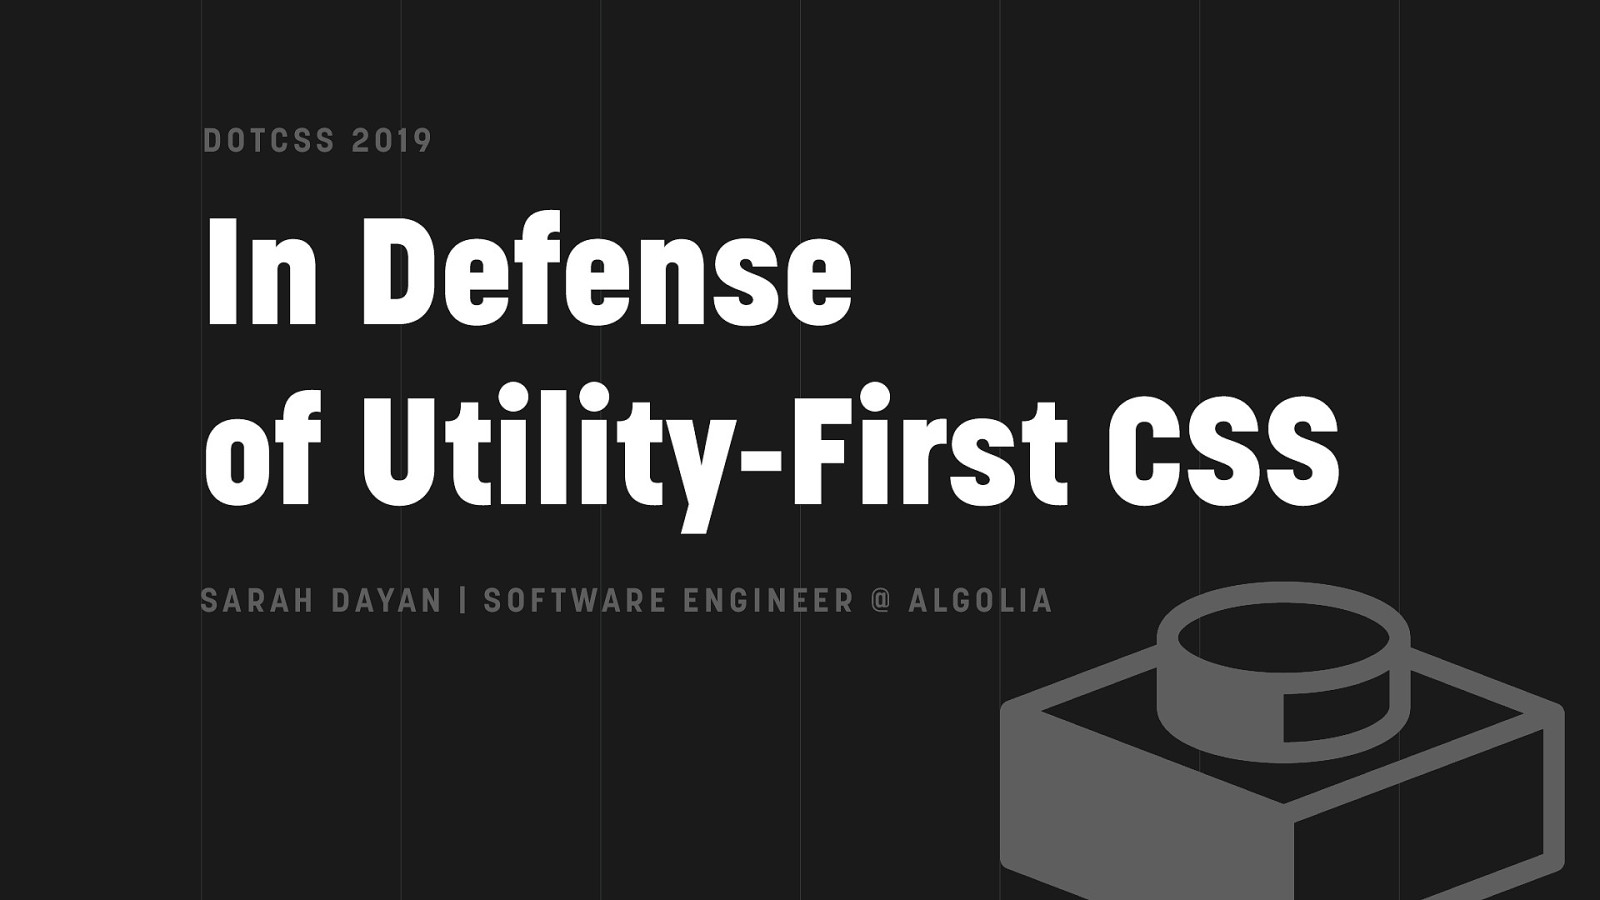 In Defense of Utility-First CSS